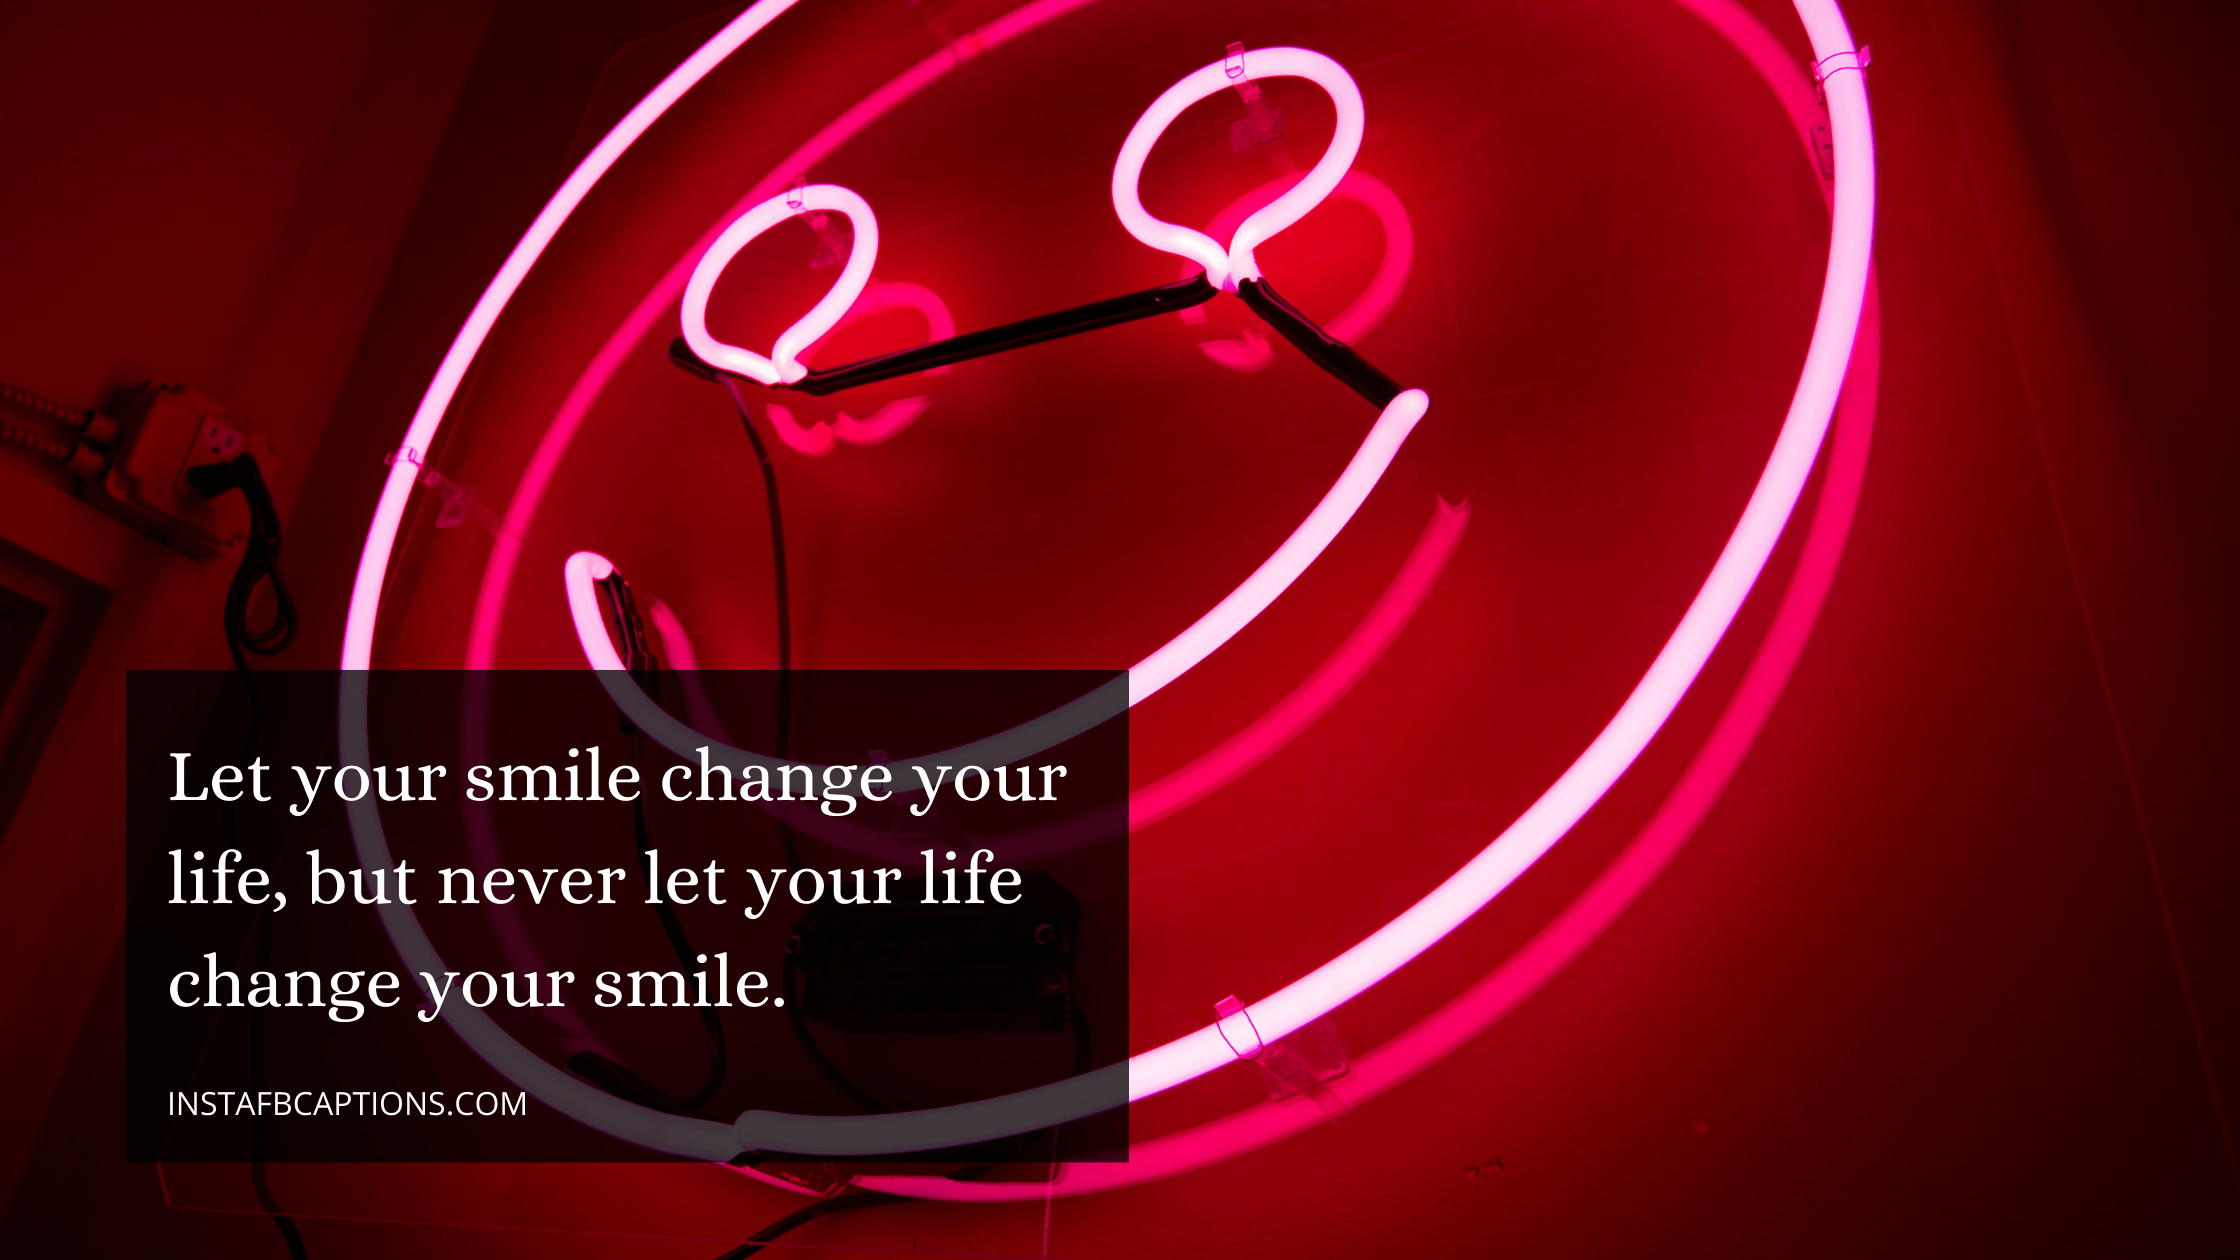 Let your smile change your life, but never let your life change your smile attitude captions for instagram - Sassy Attitude captions for Instagram - 155+ Trending Instagram Attitude Captions For Boys And Girls